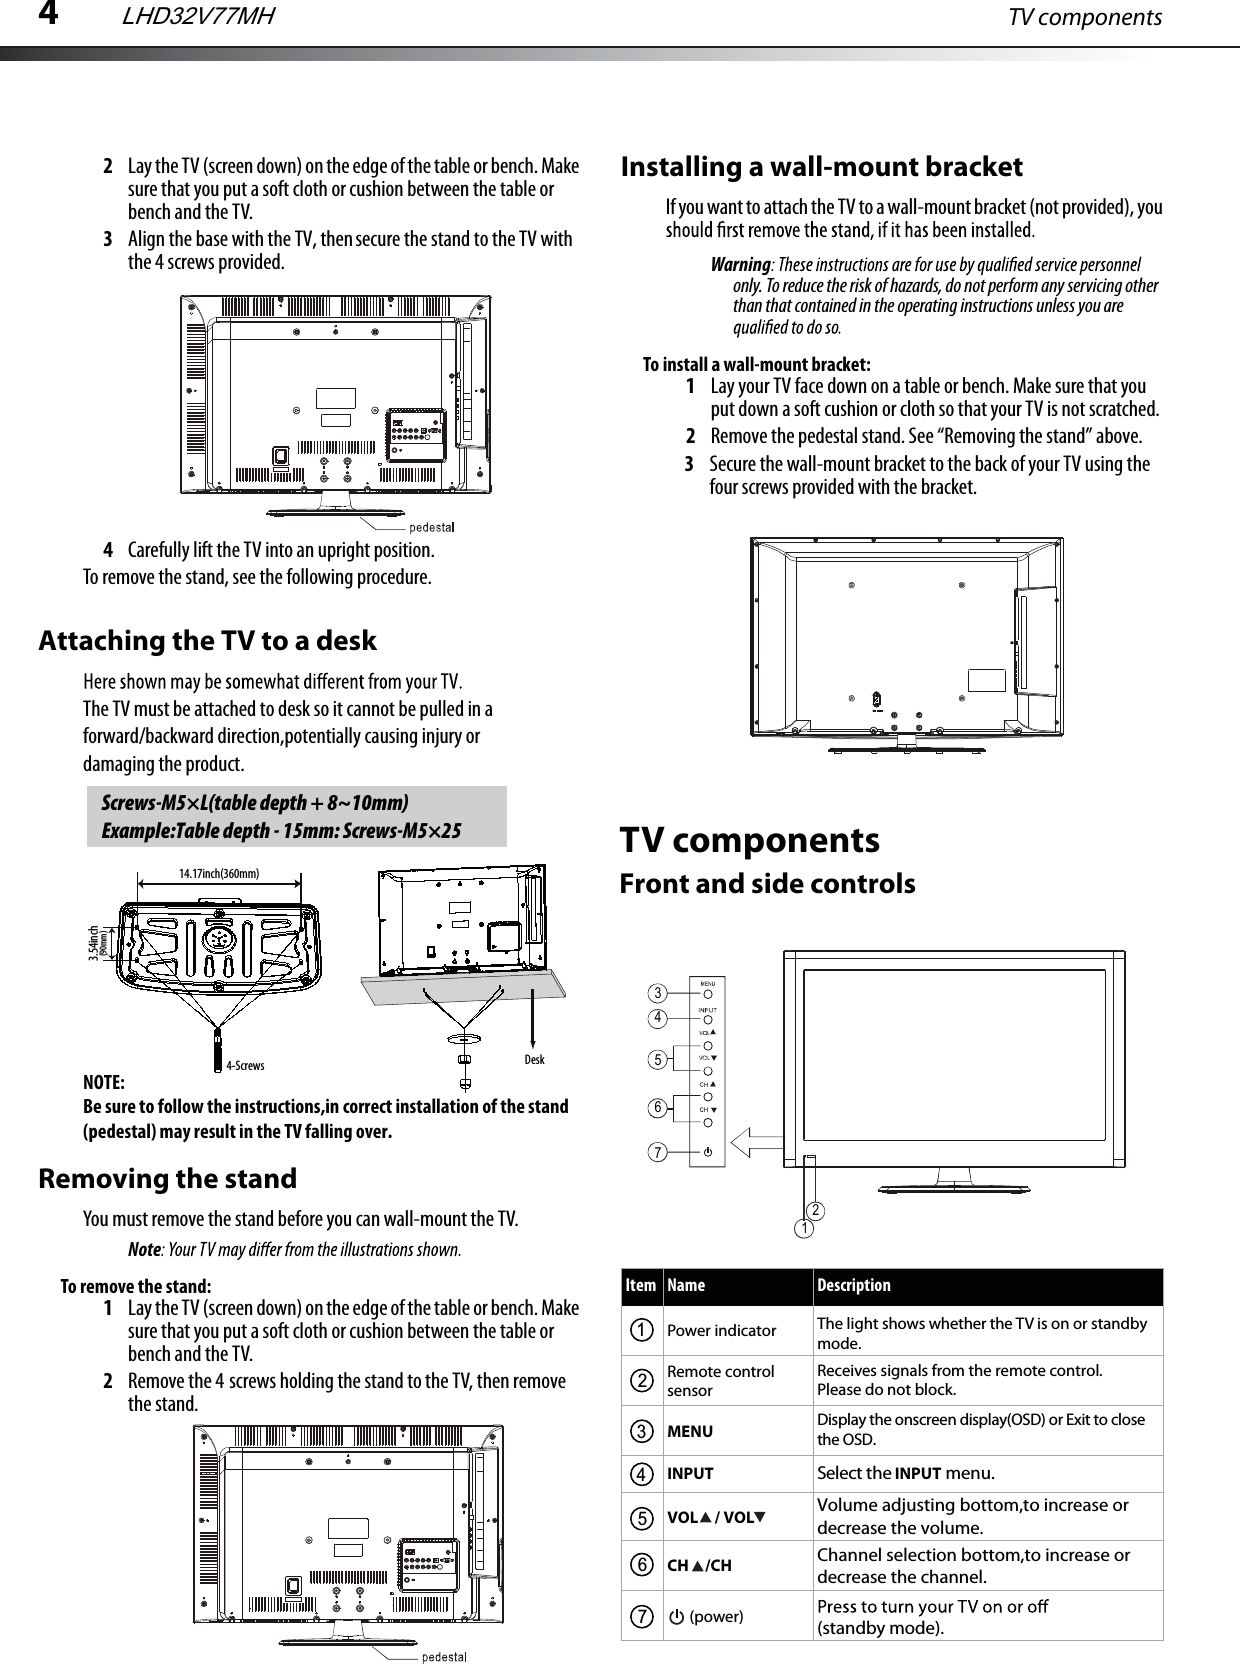 4TV components2Lay the TV (screen down) on the edge of the table or bench. Make sure that you put a soft cloth or cushion between the table or bench and the TV.3Align the base with the TV, then secure the stand to the TV with the 4 screws provided.4Carefully lift the TV into an upright position.To remove the stand, see the following procedure.The TV must be attached to desk so it cannot be pulled in a forward/backward direction,potentially causing injury ordamaging the product.NOTE:Be sure to follow the instructions,in correct installation of the stand(pedestal) may result in the TV falling over.Removing the standAttaching the TV to a deskYou must remove the stand before you can wall-mount the TV.NoteTo remove the stand:1Lay the TV (screen down) on the edge of the table or bench. Make sure that you put a soft cloth or cushion between the table or bench and the TV.2Remove the 4 screws holding the stand to the TV, then remove the stand.Installing a wall-mount bracketIf you want to attach the TV to a wall-mount bracket (not provided), you Warningonly. To reduce the risk of hazards, do not perform any servicing other than that contained in the operating instructions unless you are To install a wall-mount bracket:1Lay your TV face down on a table or bench. Make sure that you put down a soft cushion or cloth so that your TV is not scratched.2Remove the pedestal stand. See “Removing the stand” above.3Secure the wall-mount bracket to the back of your TV using the four screws provided with the bracket.TV componentsFront and side controlsScrews-M5×L(table depth + 8~10mm)Example:Table depth - 15mm: Screws-M5×2514.17inch(360mm)4-Screws Desk3.54inch(90mm)LHD32V77MH7654321Item Name DescriptionPower indicator The light shows whether the TV is on or standby mode.Remote control sensorReceives signals from the remote control. Please do not block. MENU Display the onscreen display(OSD) or Exit to close the OSD.INPUT Select the INPUT menu. VOL / VOL Volume adjusting bottom,to increase or decrease the volume. Channel selection bottom,to increase or decrease the channel. CH /CH (power) (standby mode).5671234